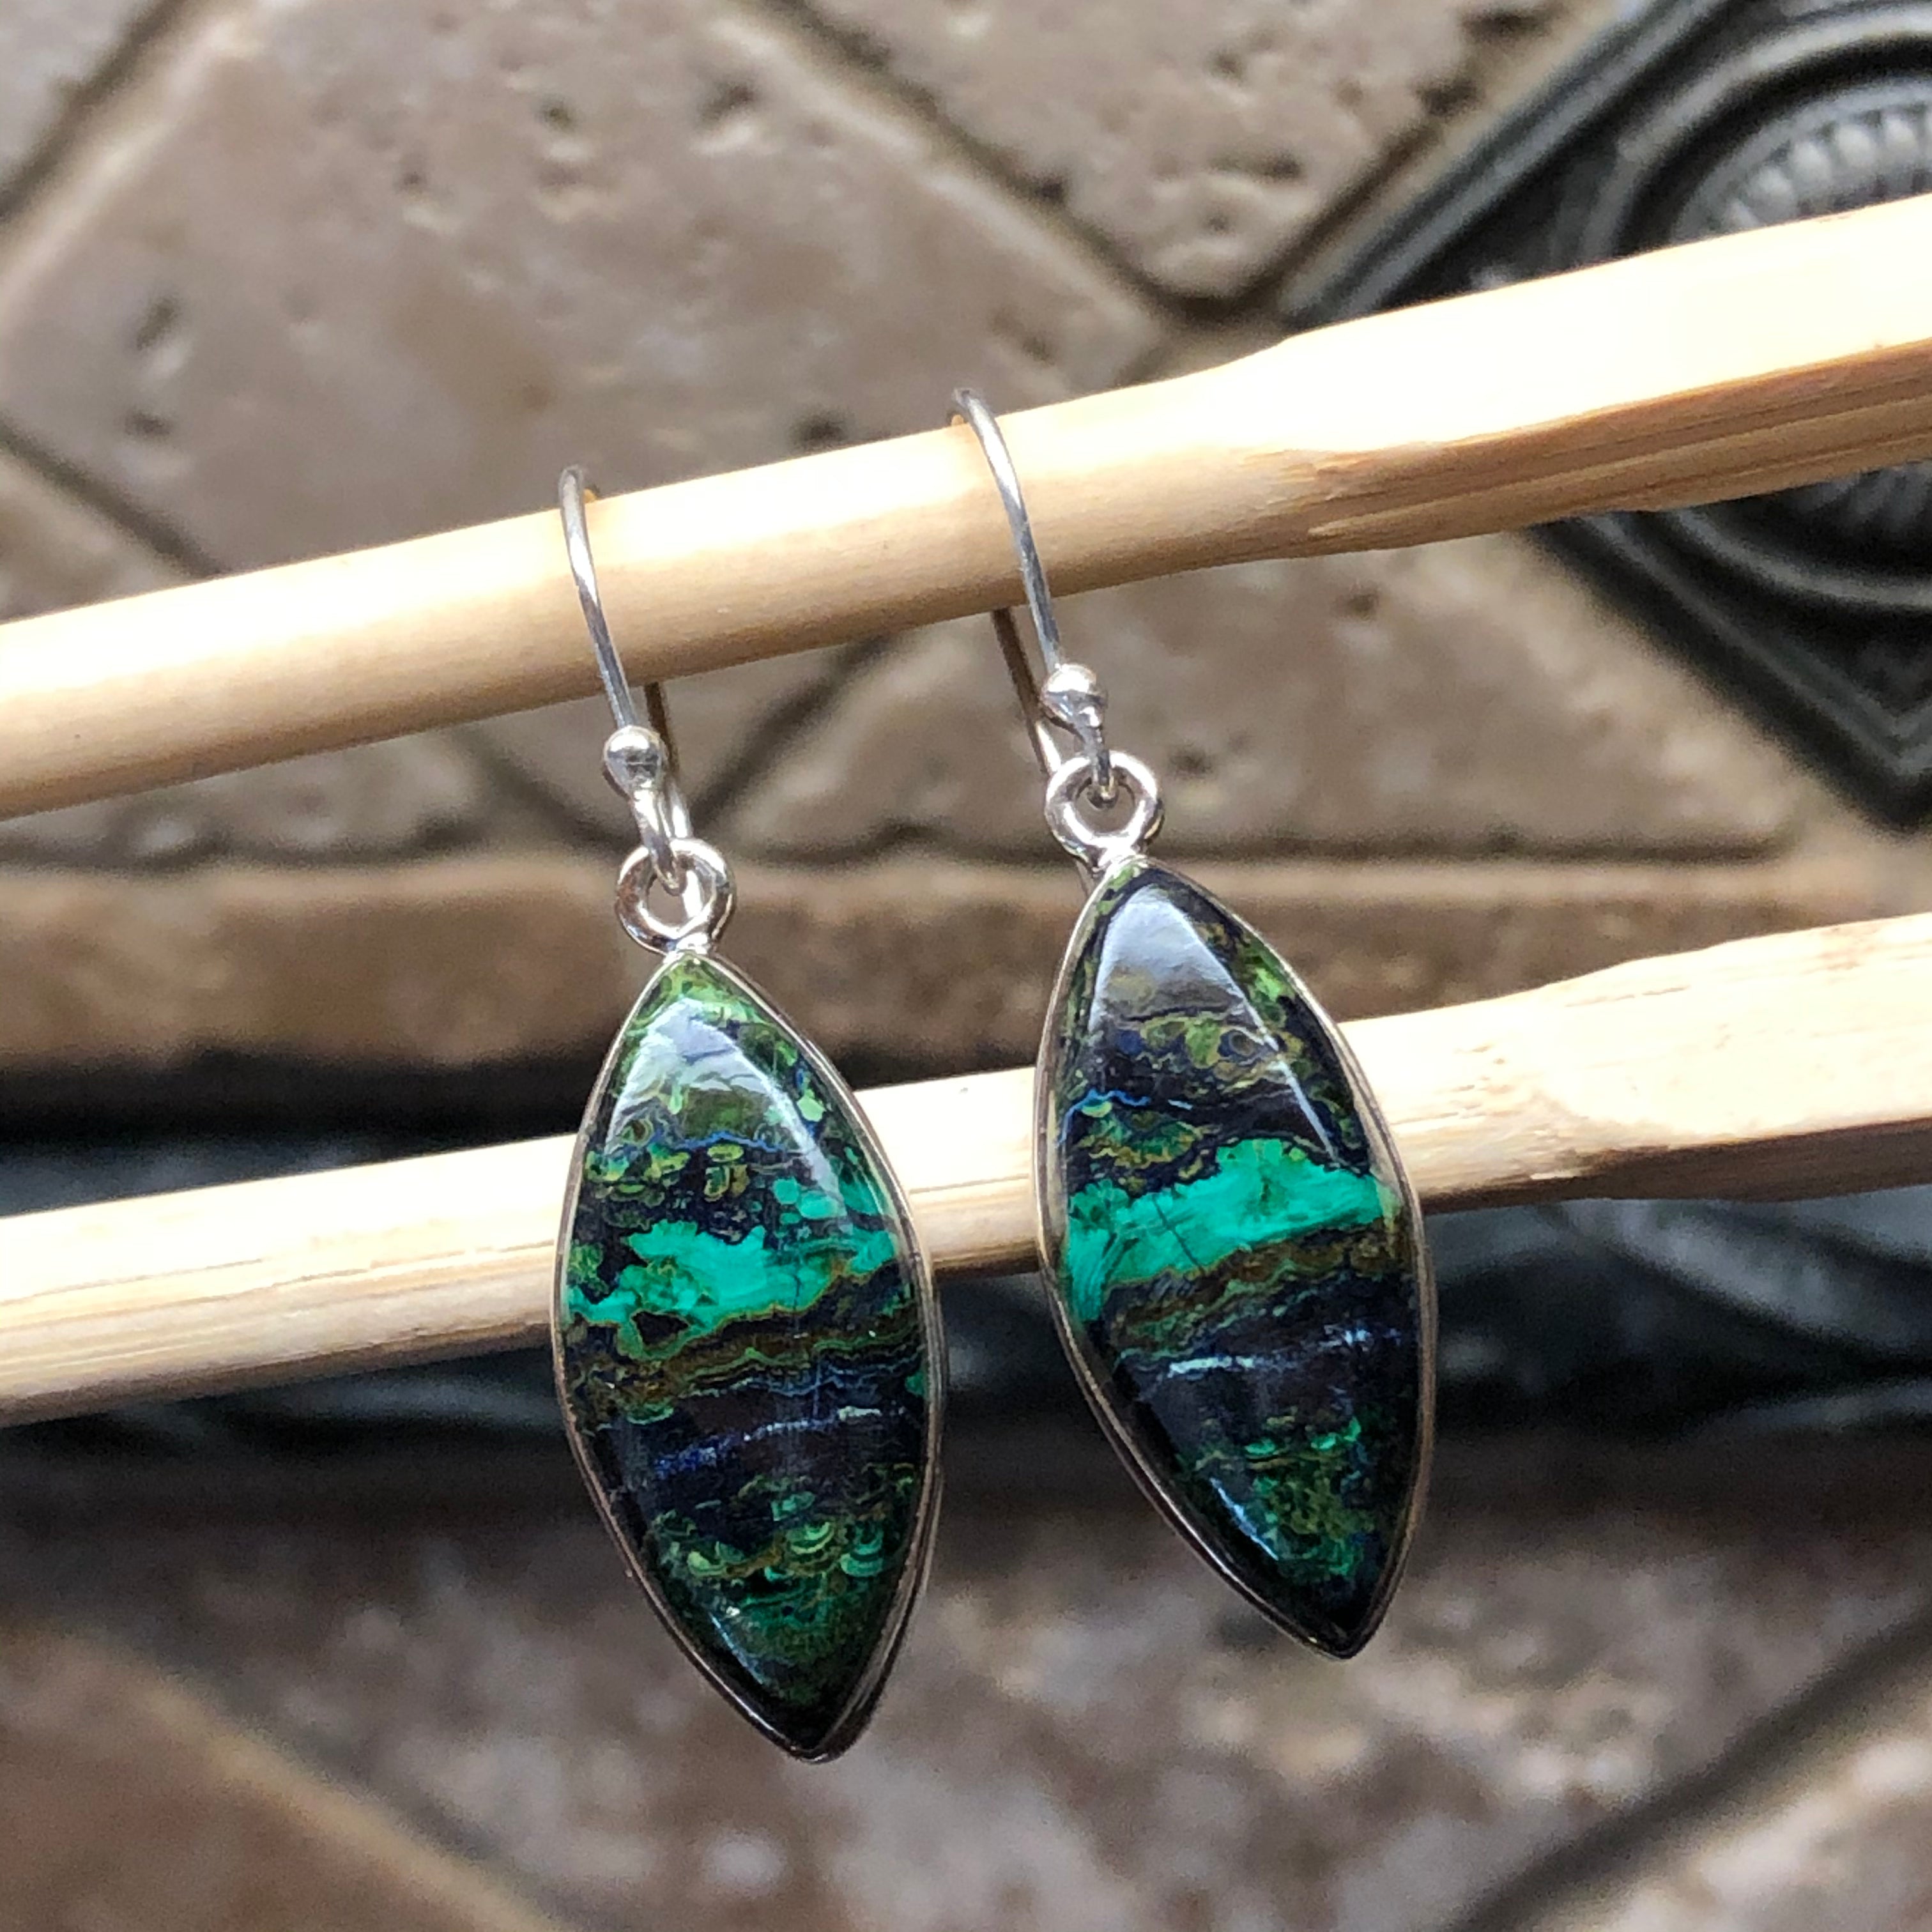 Natural Malachite in Azurite 925 Sterling Silver Earrings 35mm - Natural Rocks by Kala